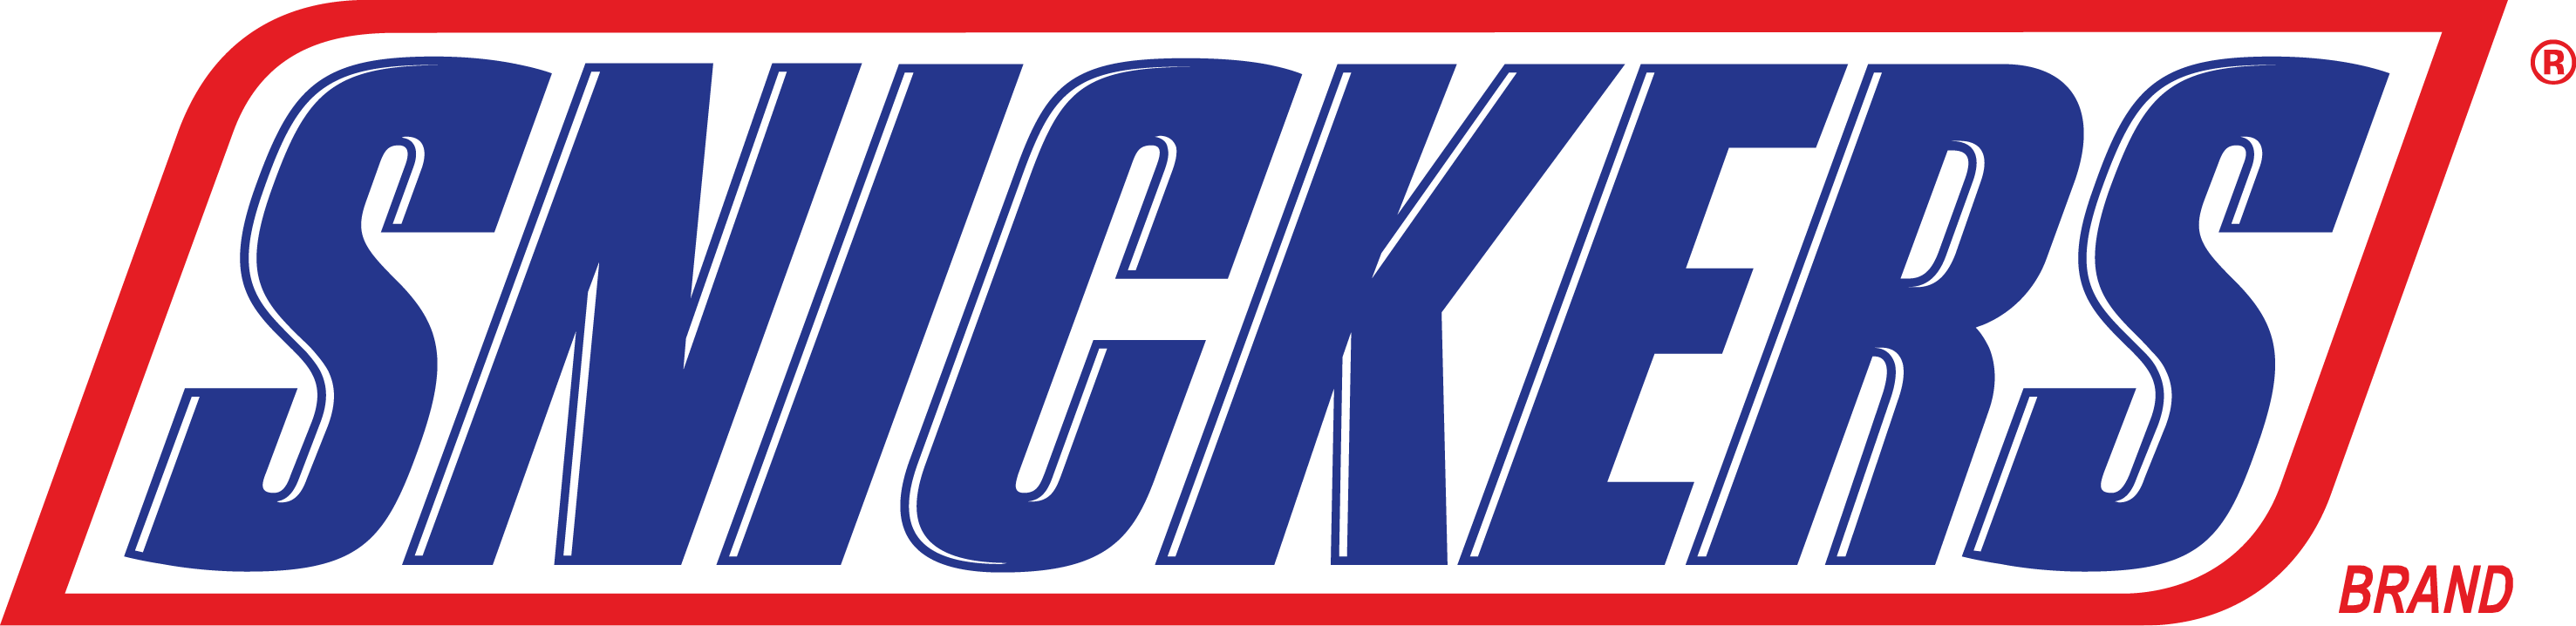 Snickers_logo